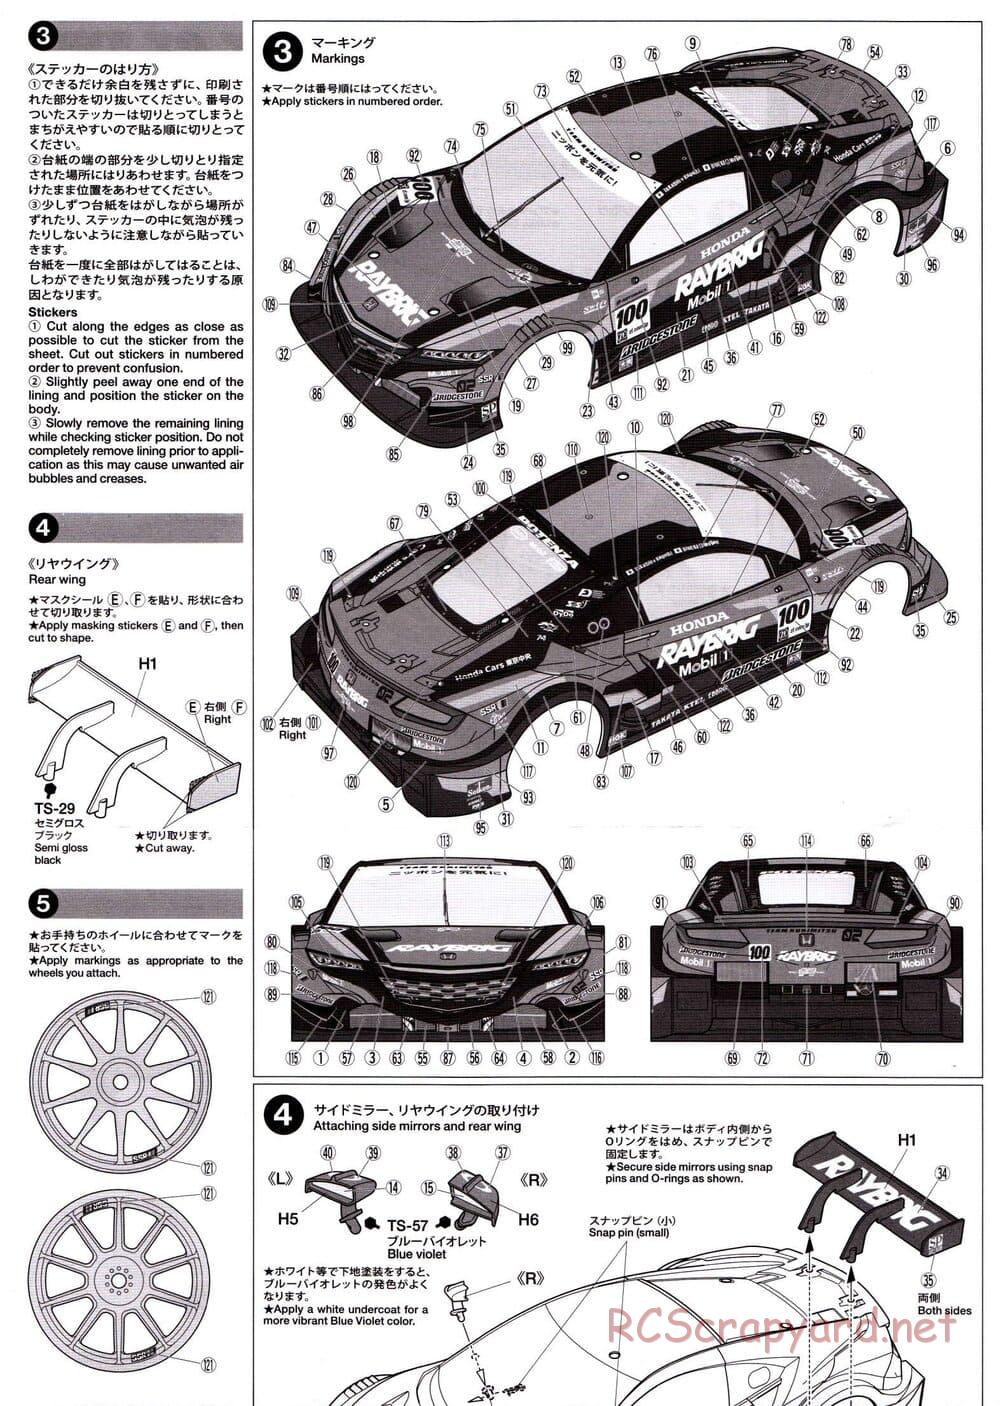 Tamiya - Raybrig NSX Concept GT - TB-04 Chassis - Body Manual - Page 3